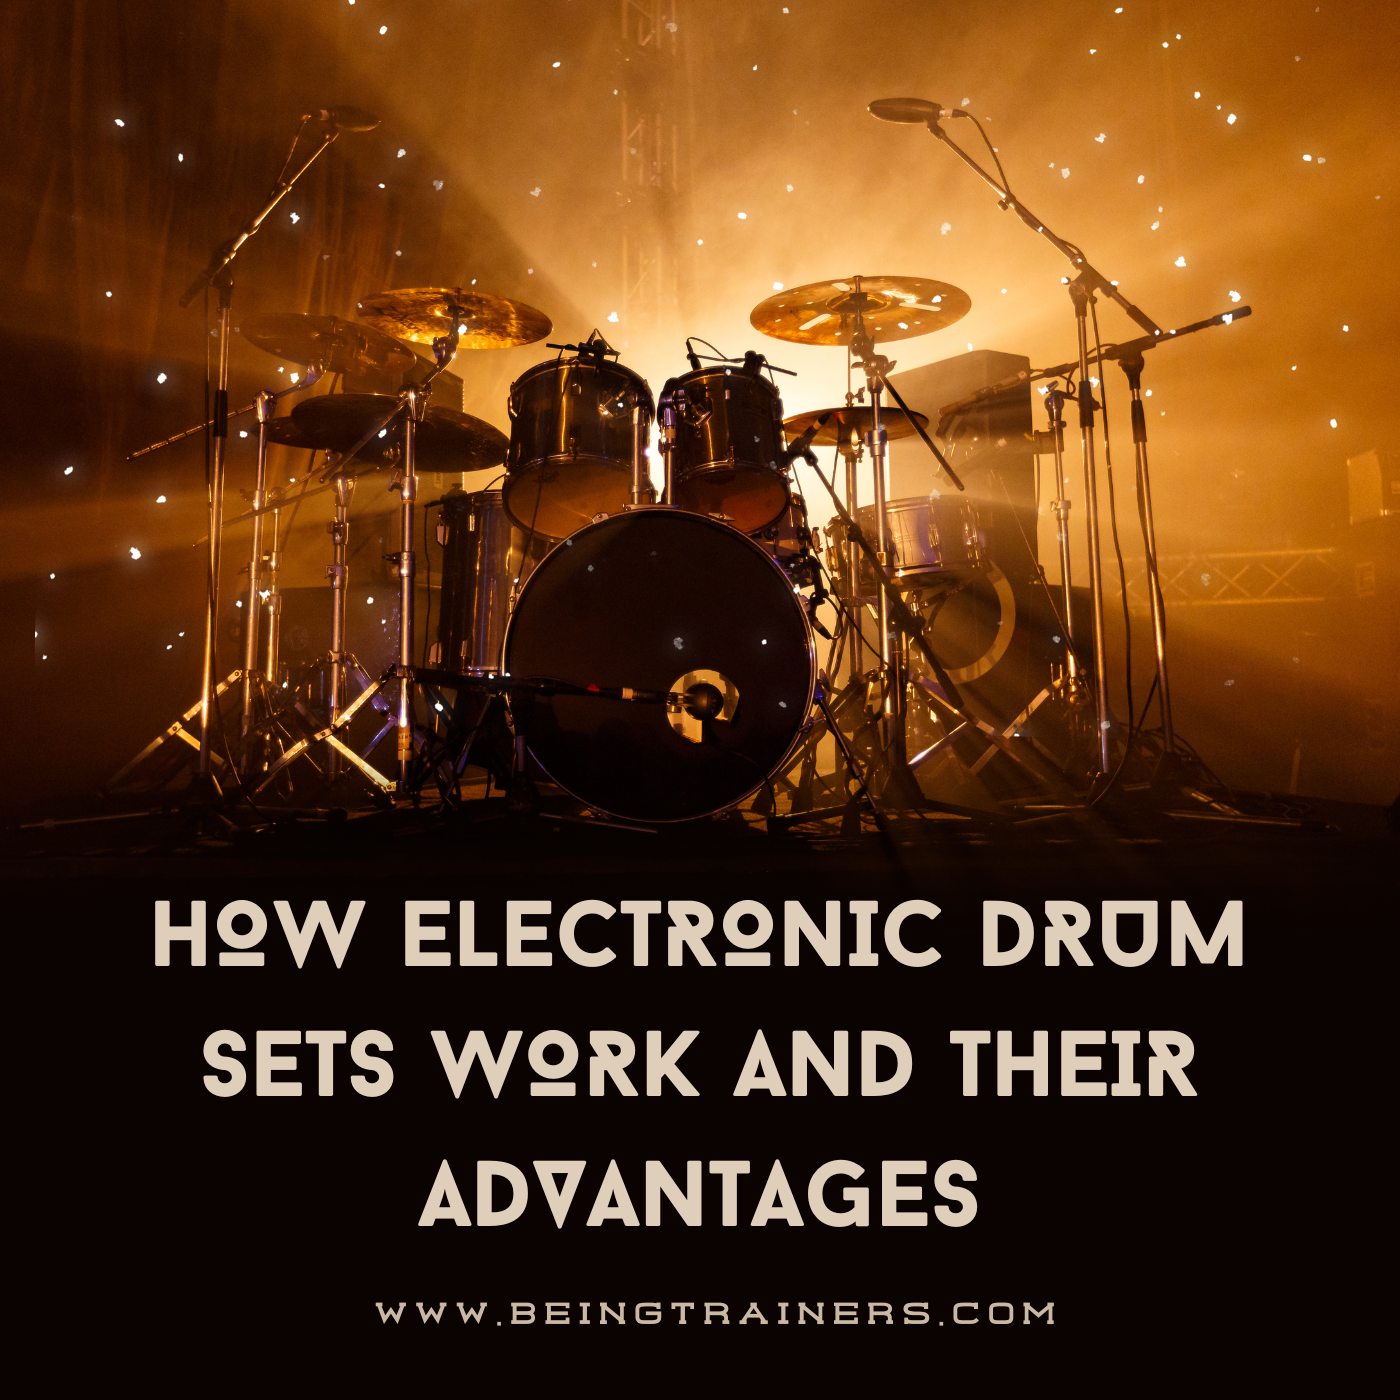 How Electronic Drum Sets Work and Their Advantages